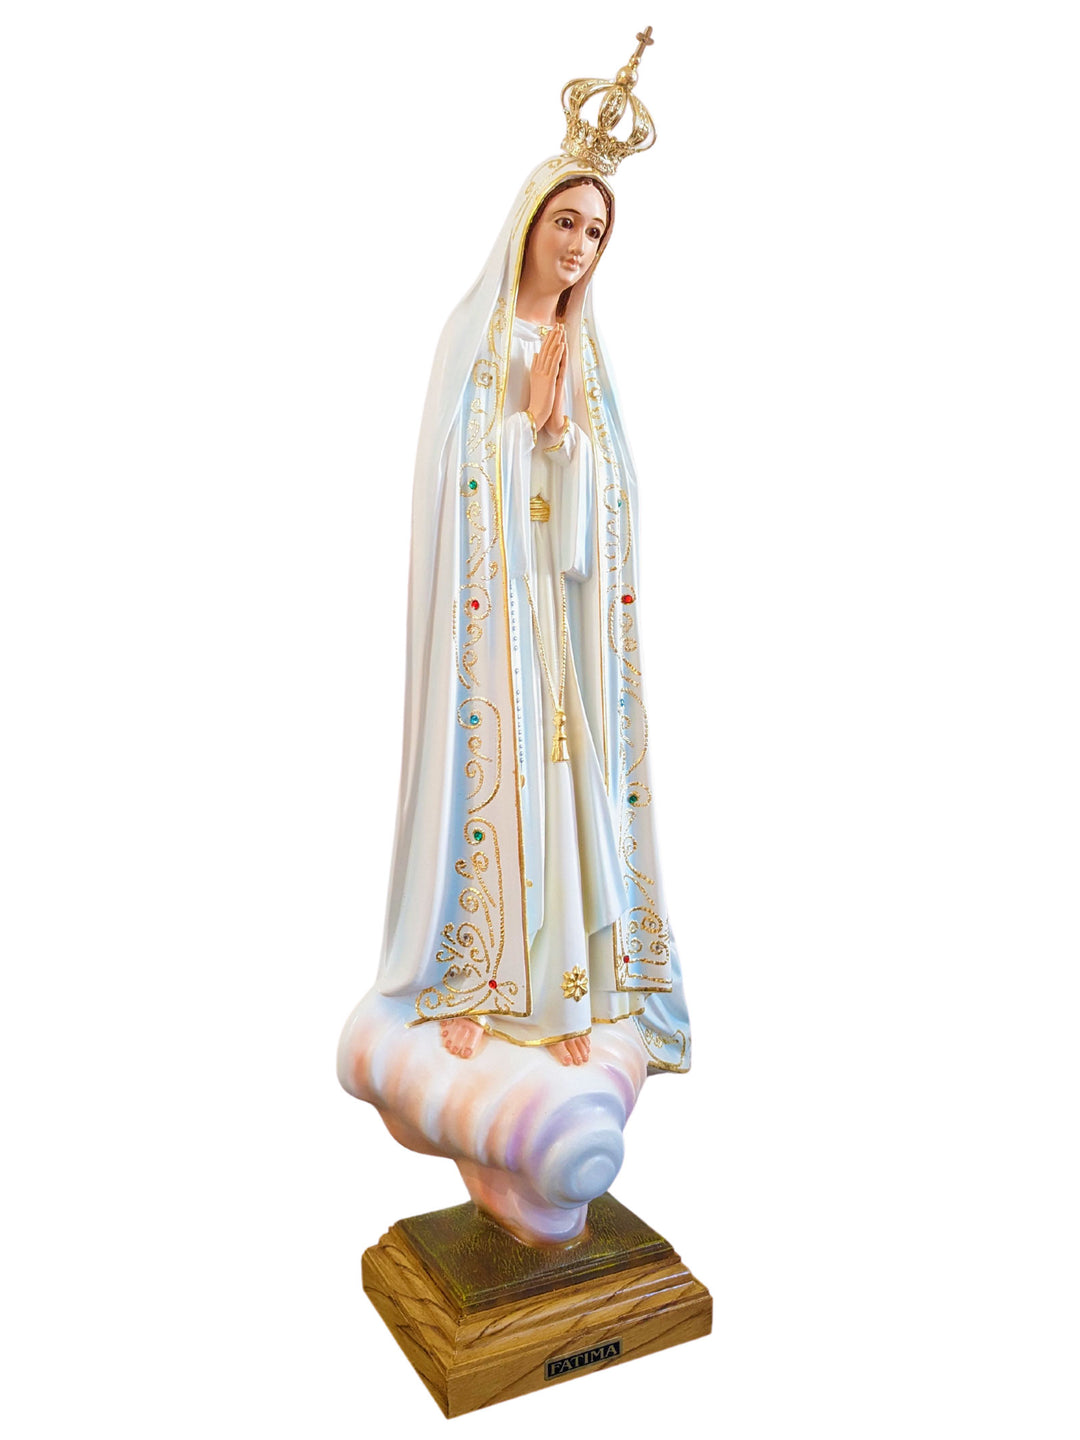 23 Inch Glass Eyes Our Lady of Fatima Statue Made in Portugal